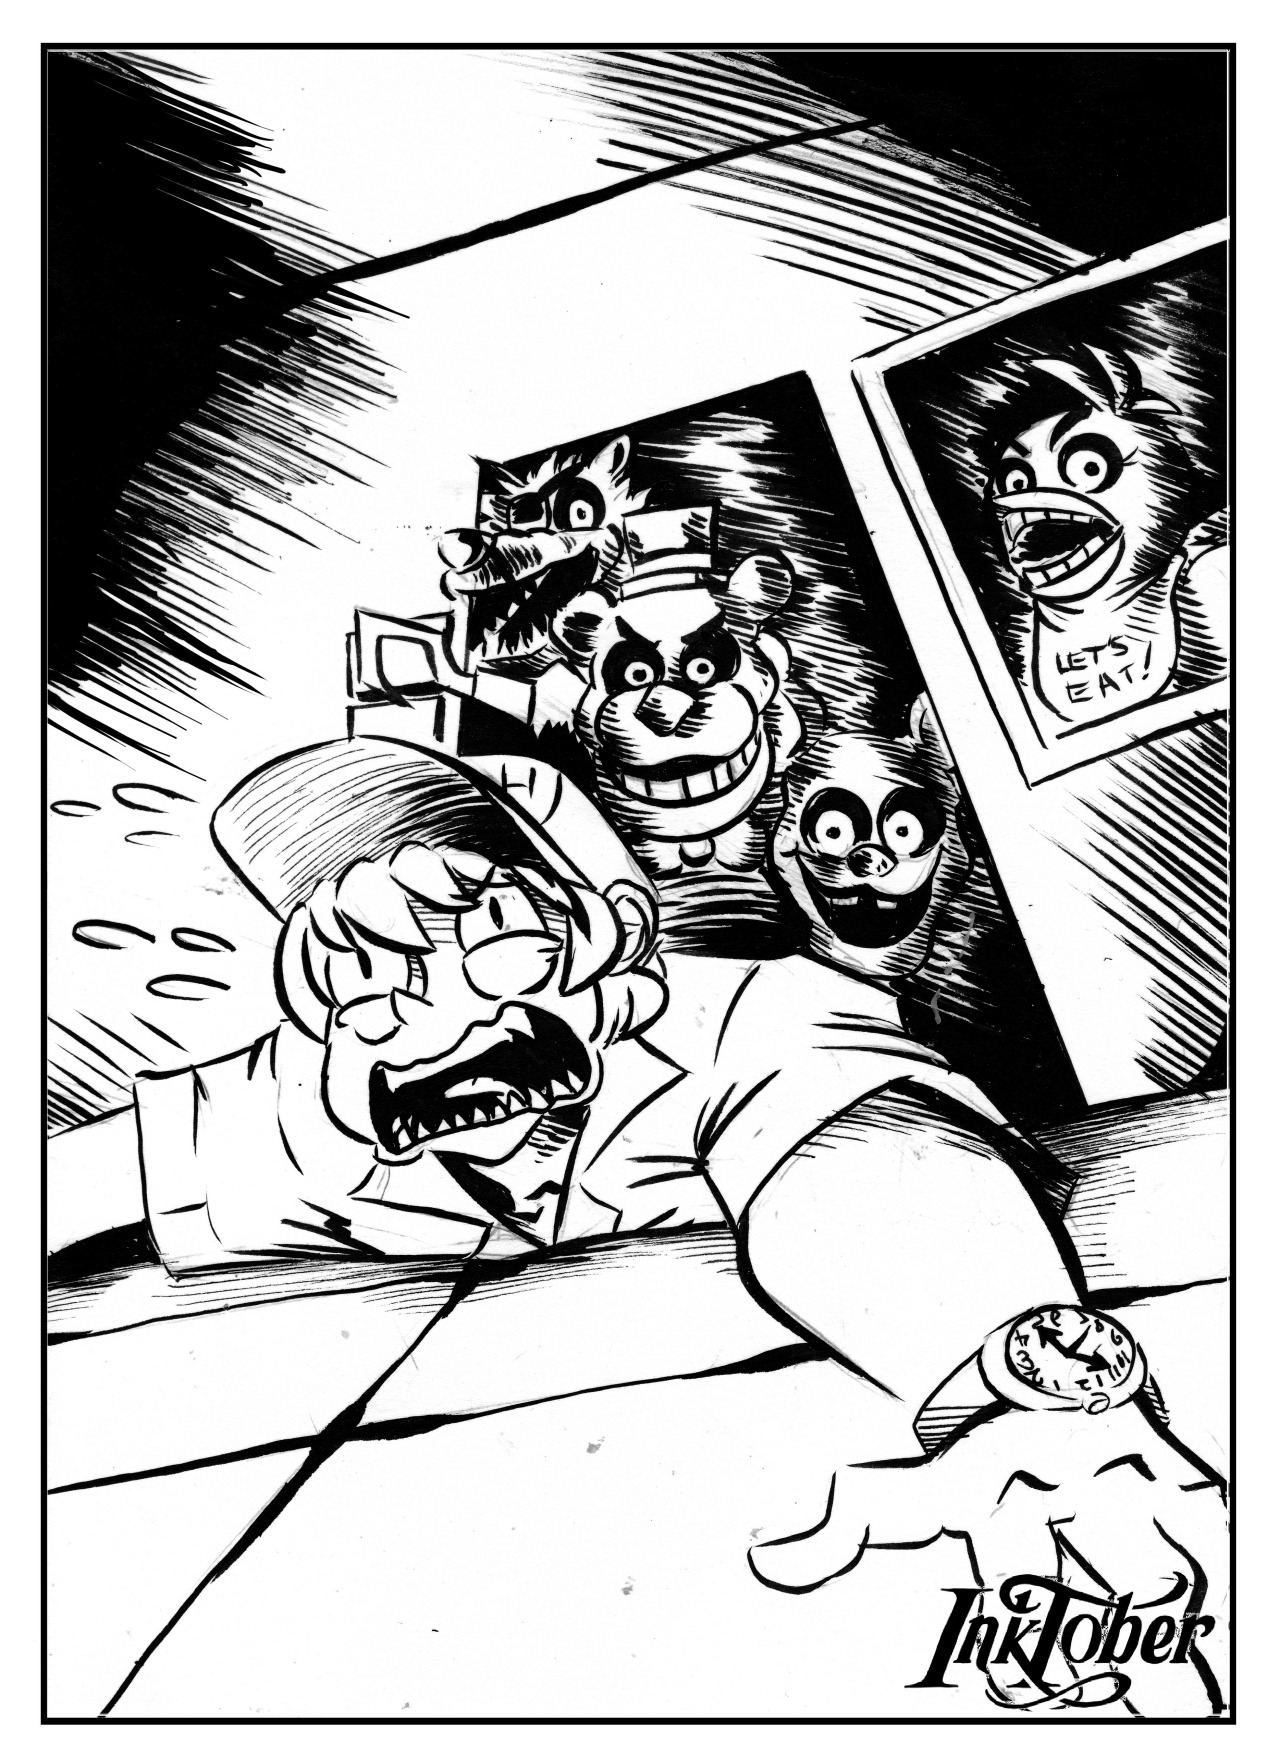 Day 09 Of inktober fest! Mike schimdt getting caught by Freddy&rsquo;s gang&hellip;